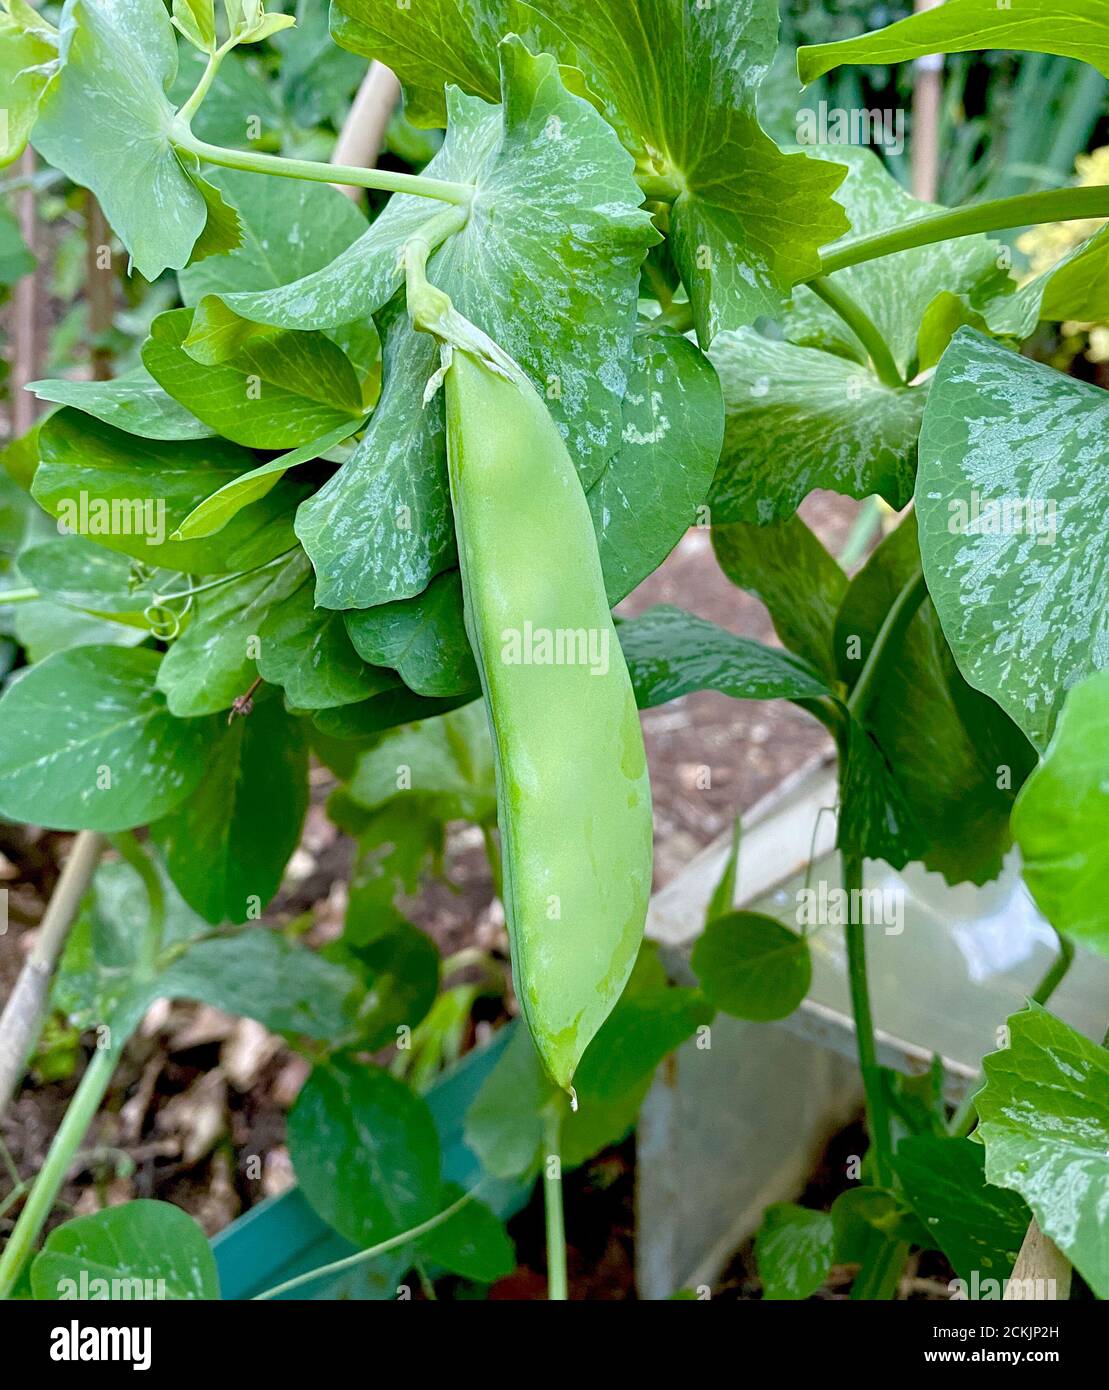 Mangetout, peas in a pod grown in and English garden in the Summer months. The green vegetable is grown up a framework of sticks tied together. Stock Photo